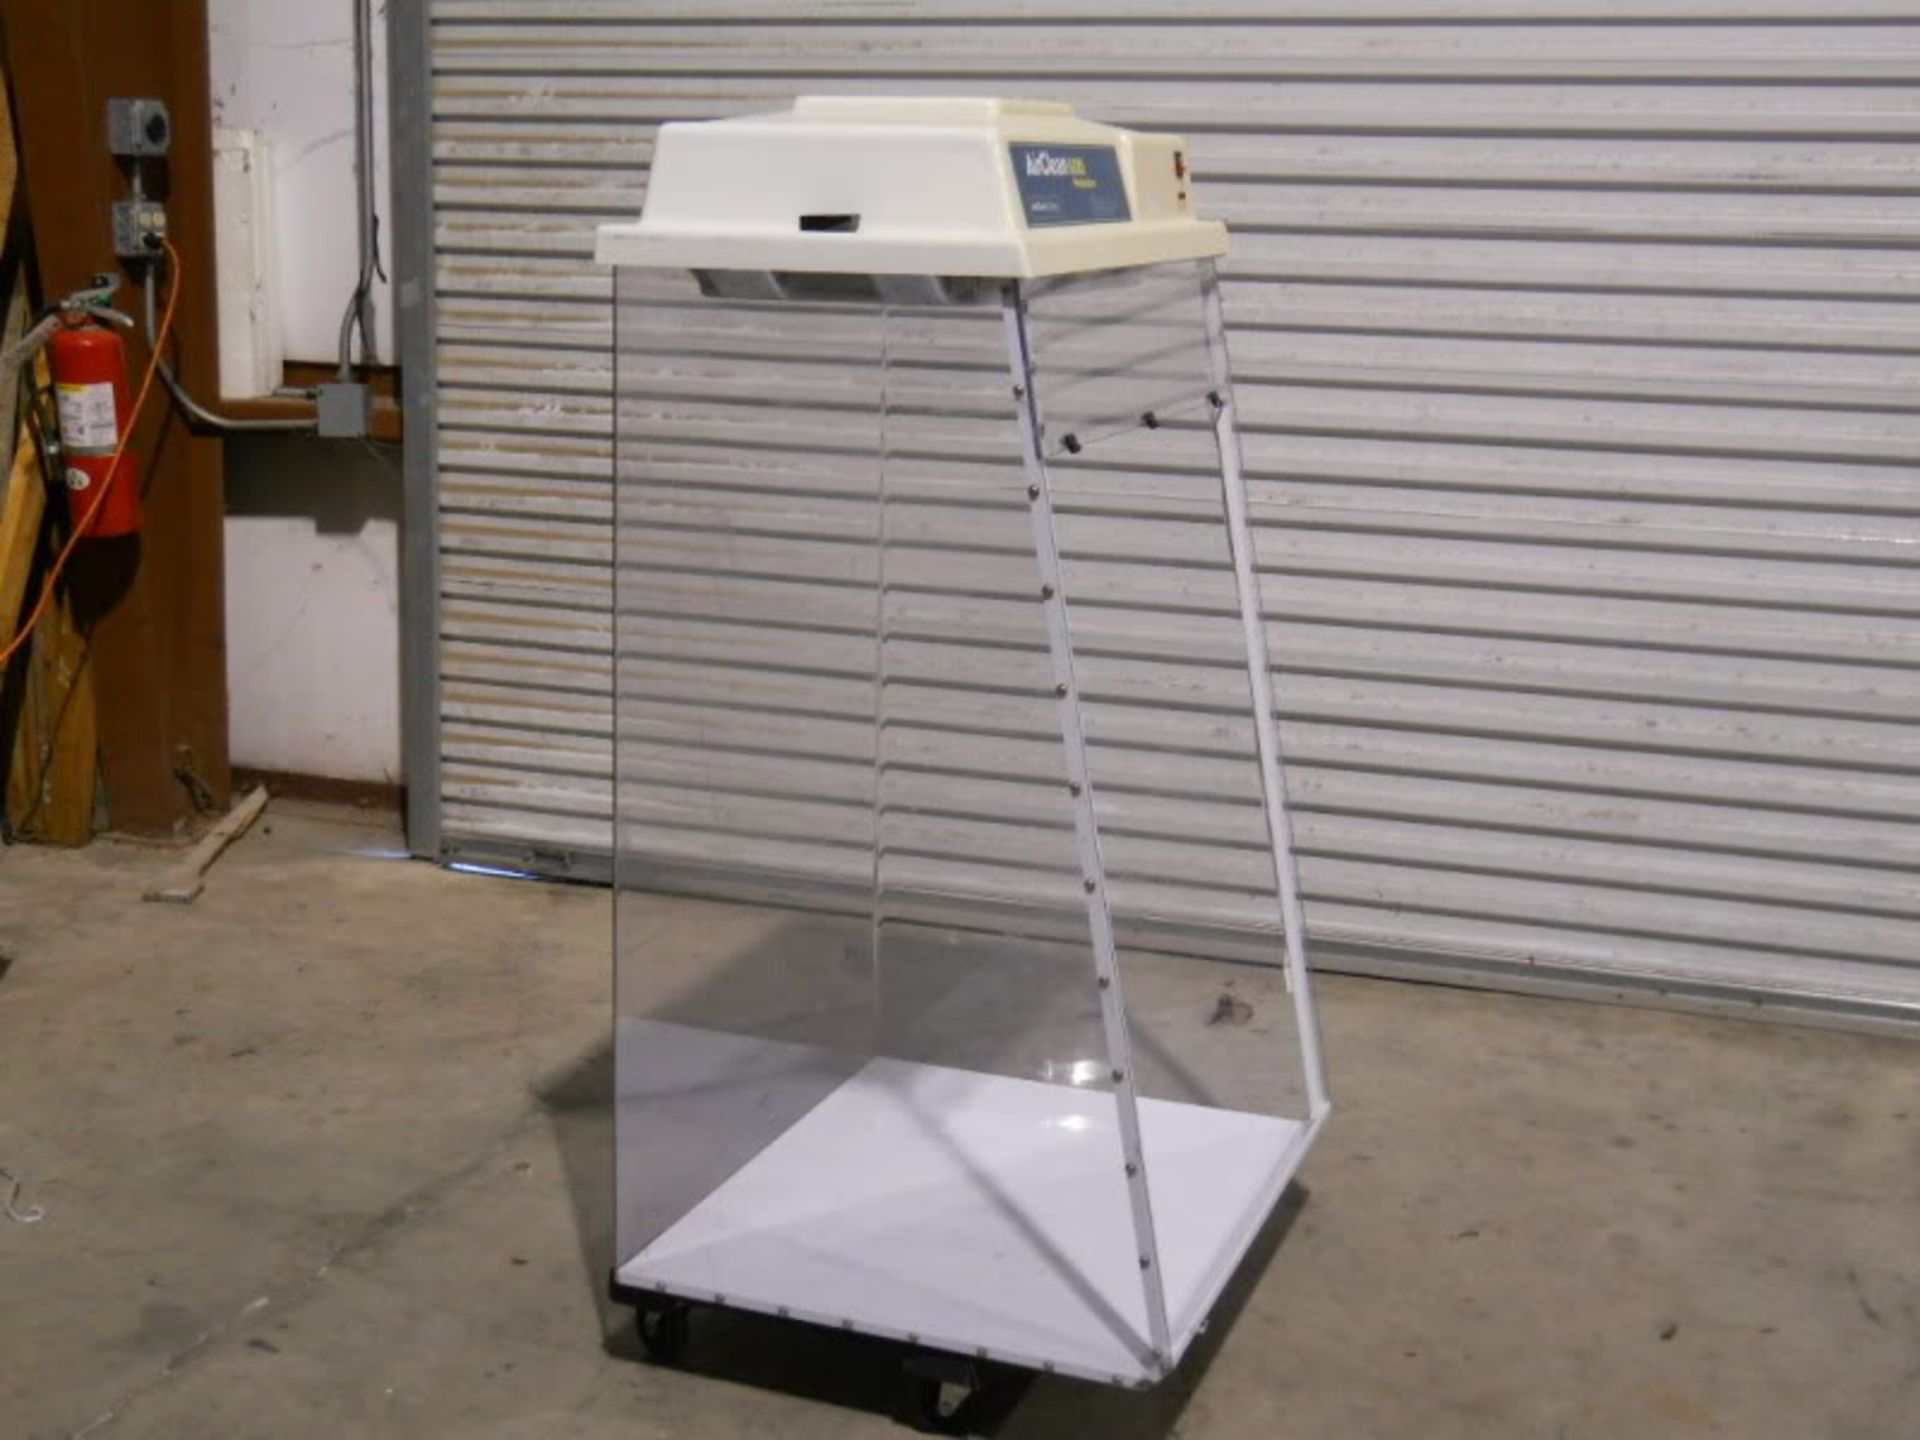 AirClean 600 Workstation "Air Clean Systems" Model AC600T, Qty 1, 330803694641 - Image 2 of 7